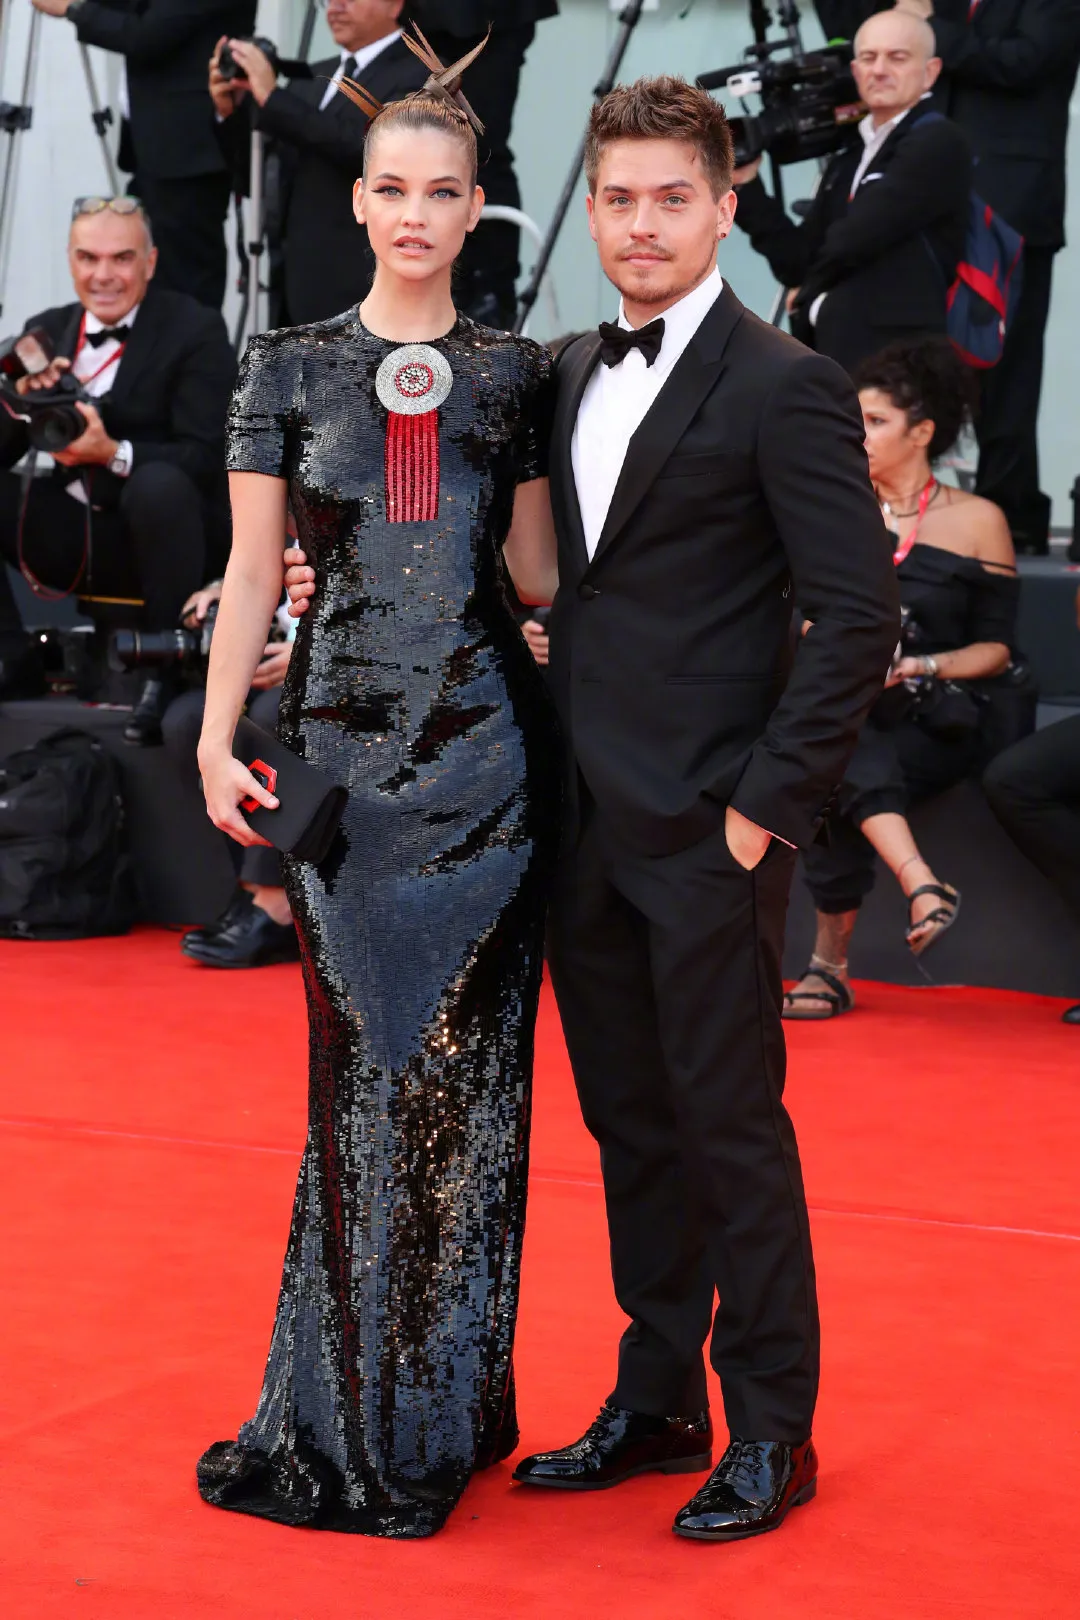 Barbara Palvin and Dylan Sprouse at the opening red carpet of the 79th Venice International Film Festival | FMV6